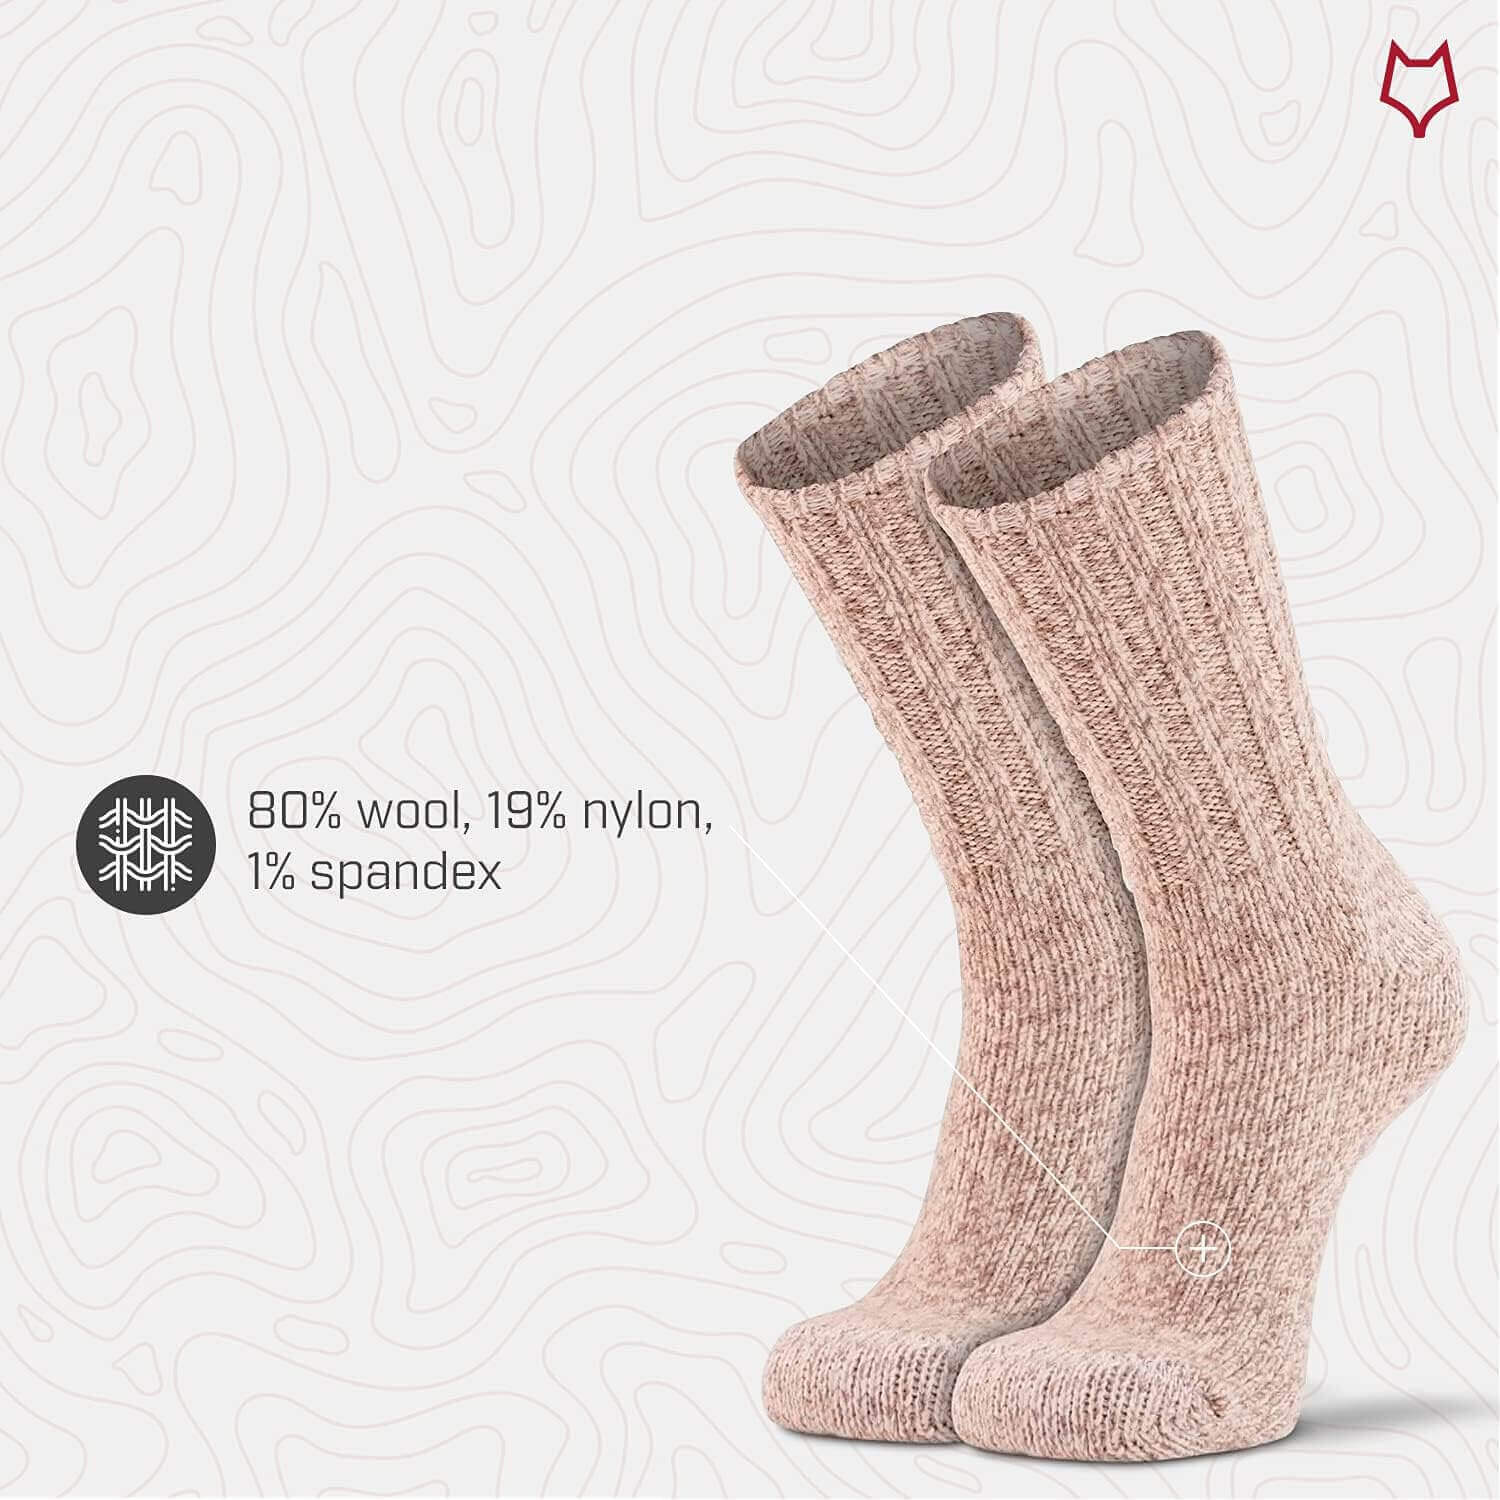 Shop The Latest >Norwegian Men’s Wool Socks for All Outdoor Adventures > *Only $23.80*> From The Top Brand > *Fox Riverl* > Shop Now and Get Free Shipping On Orders Over $45.00 >*Shop Earth Foot*